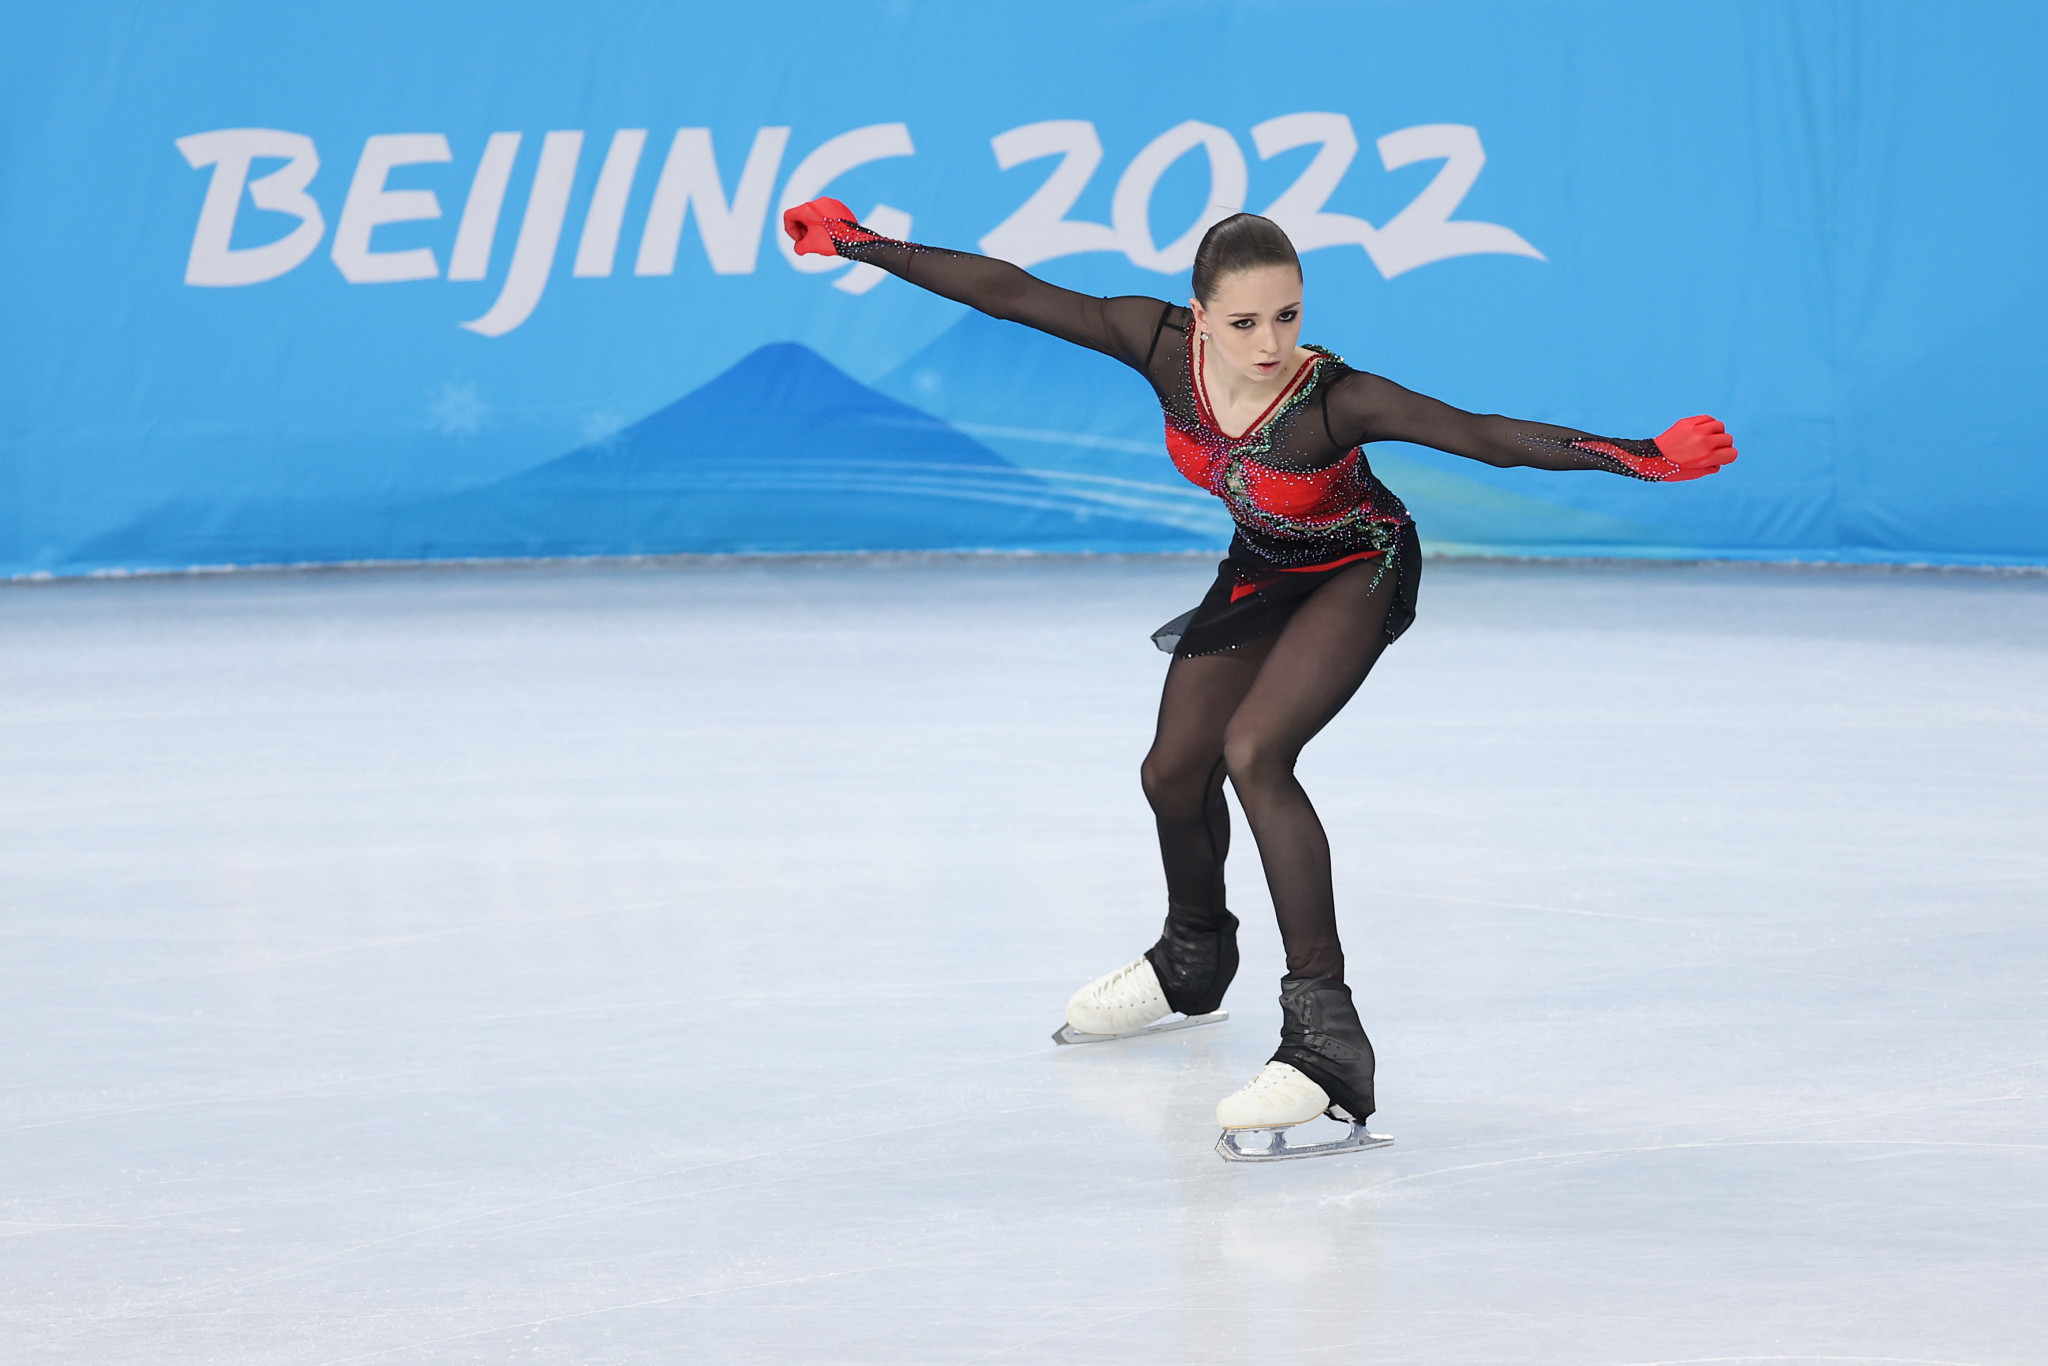 Exclusive: Teenage sensation Valieva is skater at centre of legal problem causing medal ceremony delay at Beijing 2022